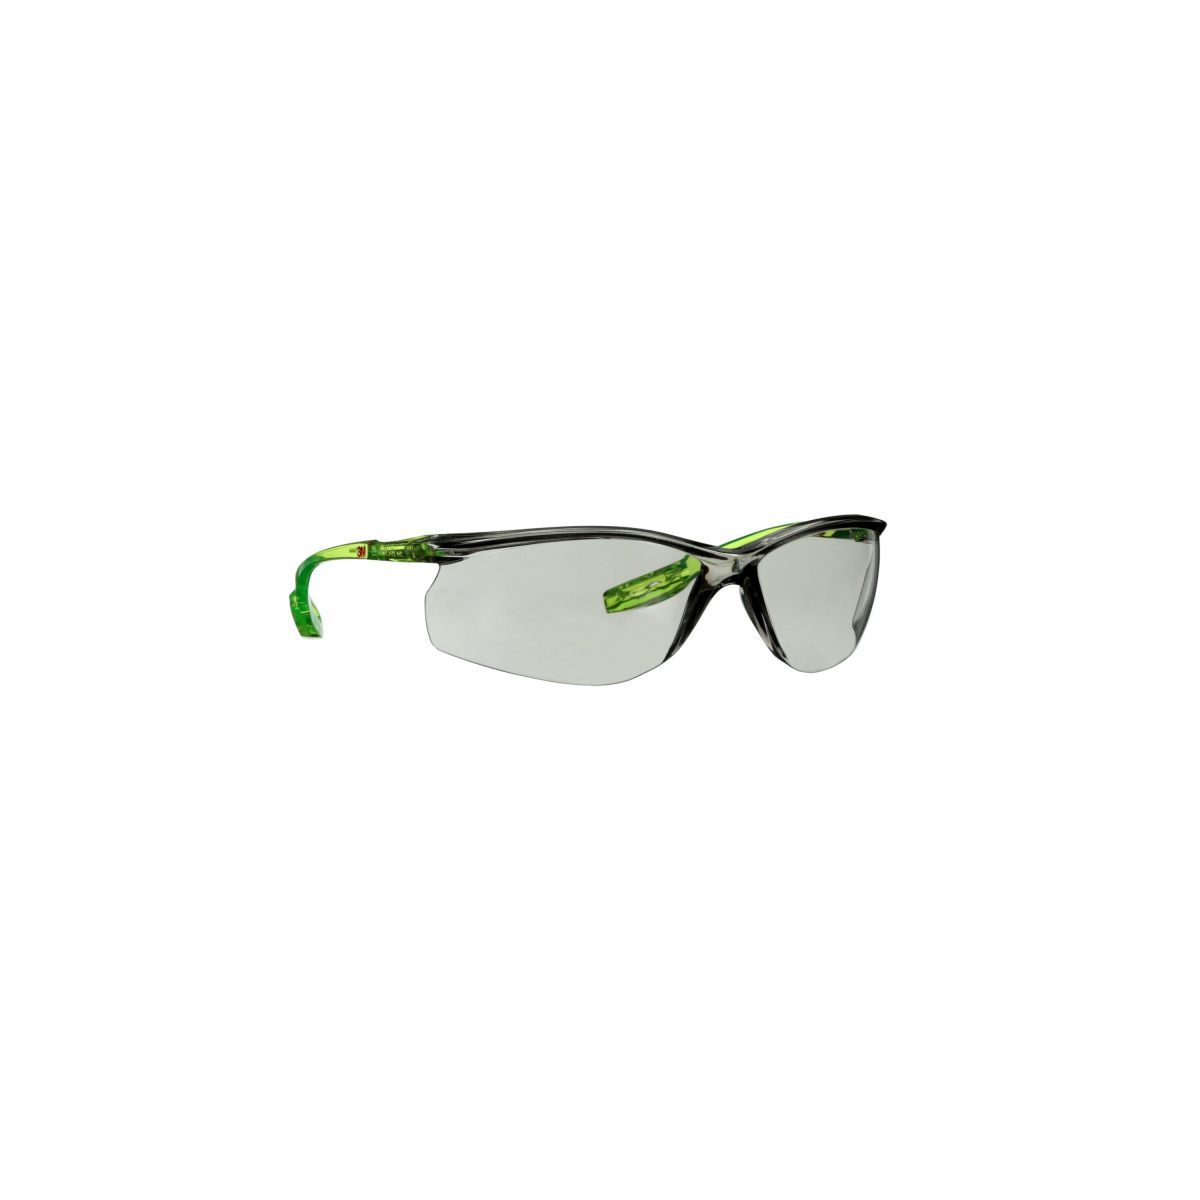 3M™ Solus™ CCS Series Gray And Bright Green Safety Glasses With Indoor/Outdoor Gray Scotchgard™ Anti-Fog/Anti-Scratch Lens (Avai